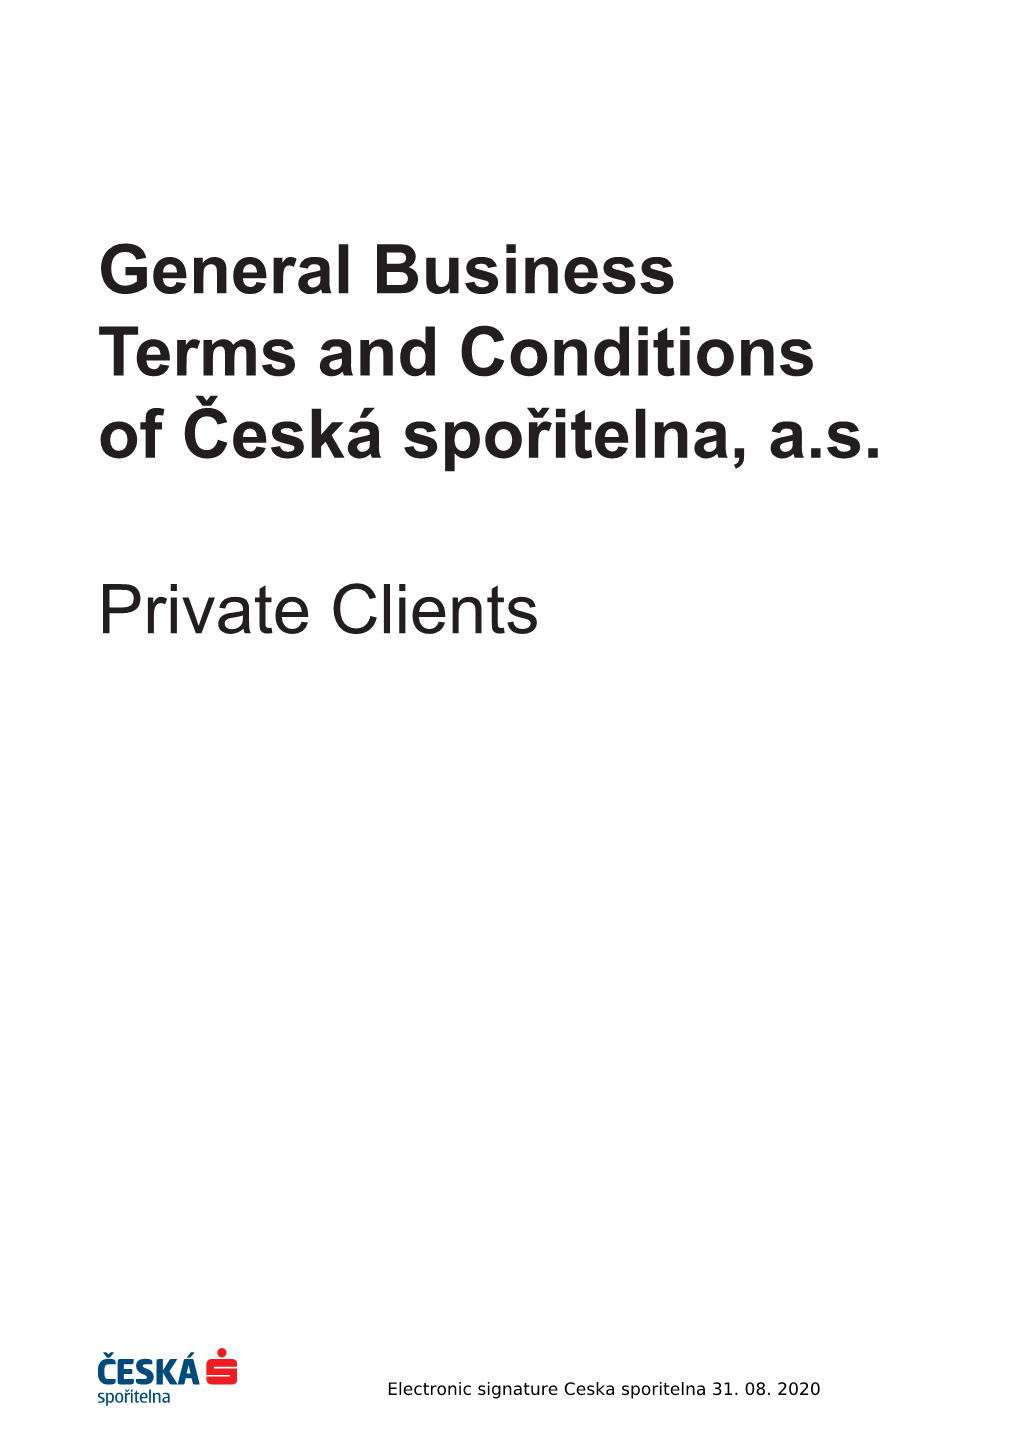 General Business Terms and Conditions of Česká Spořitelna, As Private Clients